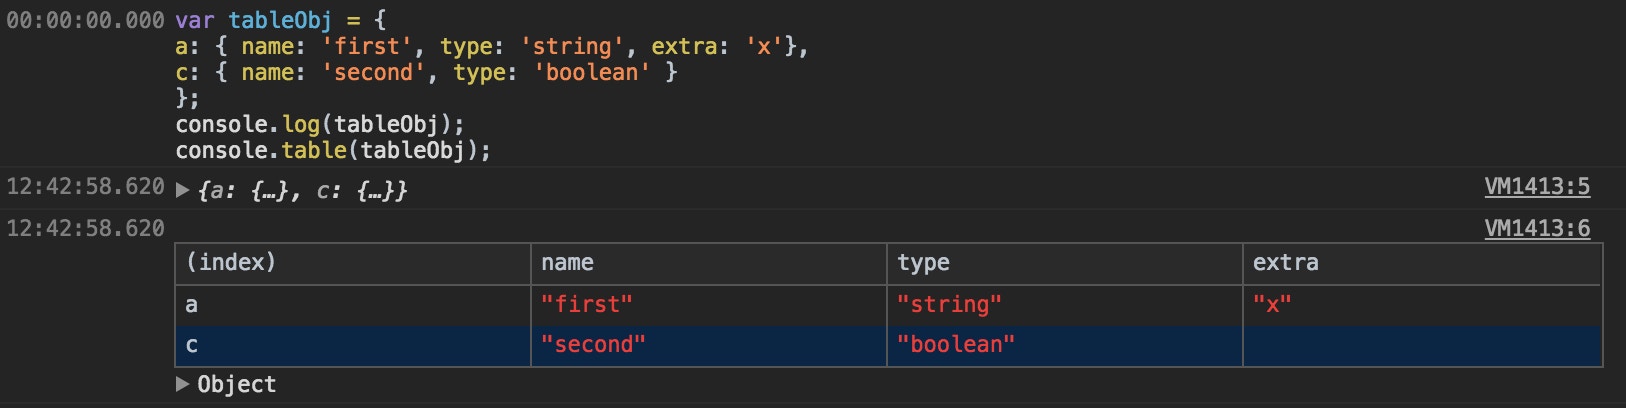 console.table.complex.object example